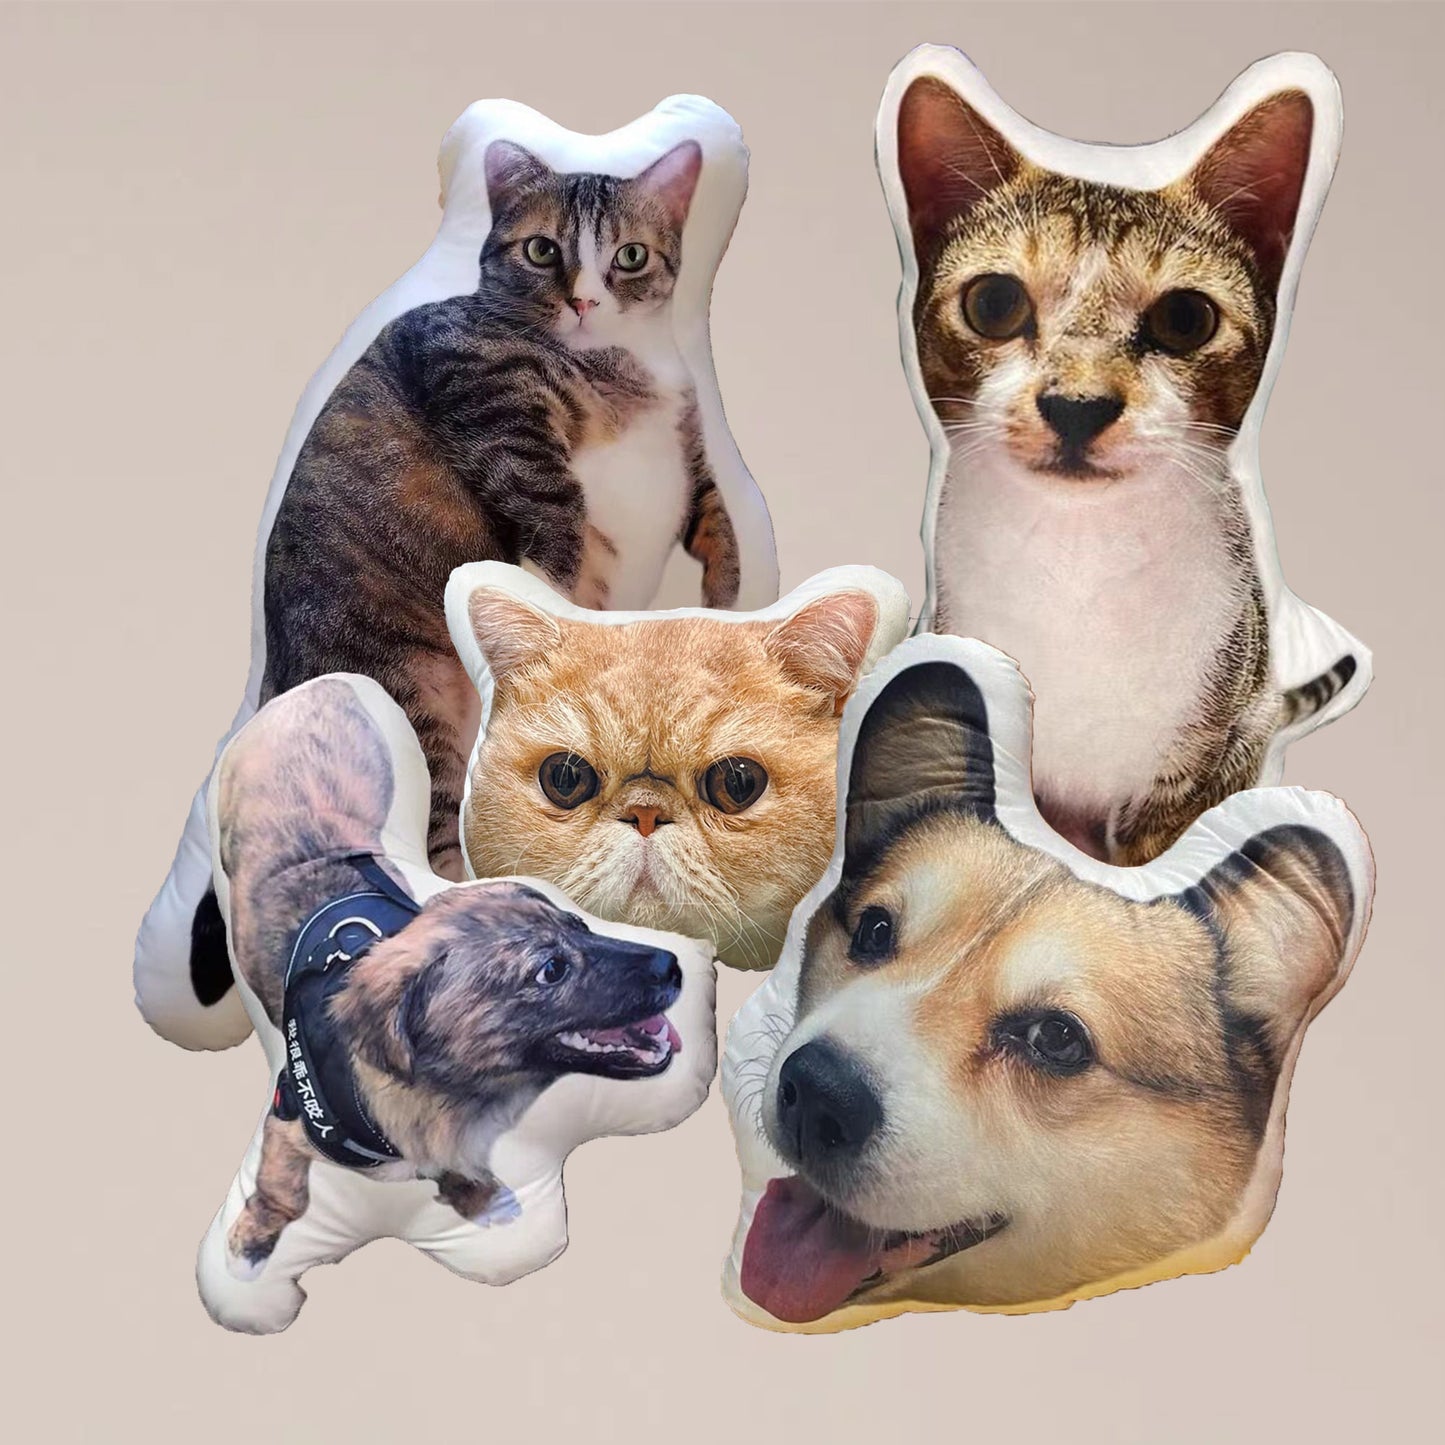 Customized all-over print body pillows, showcasing adorable dogs and cats in various shapes, including cat and dog faces, beautifully displayed together.